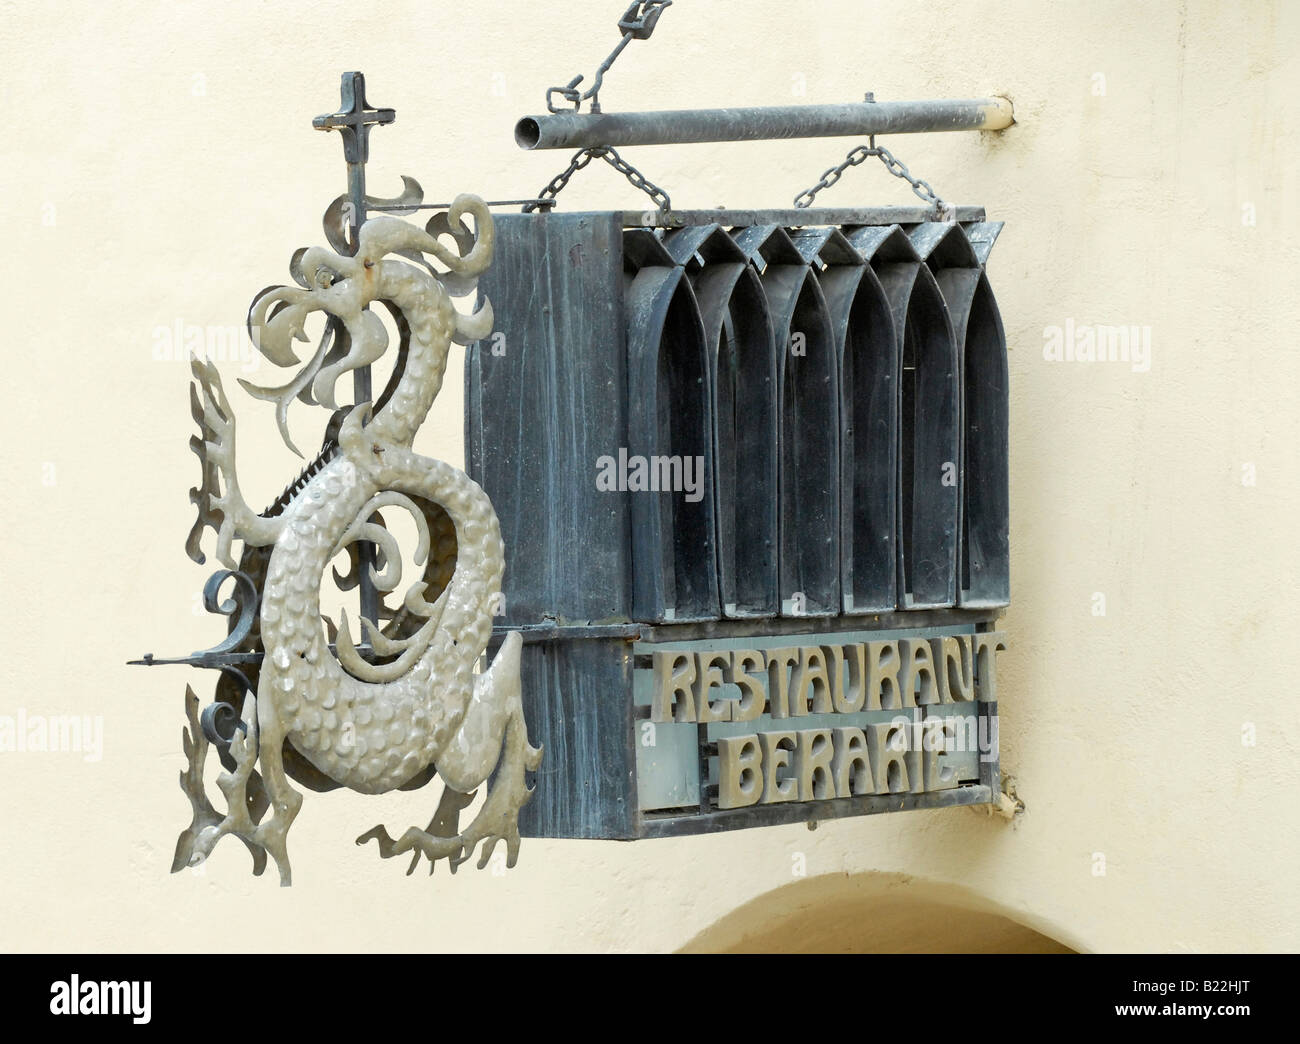 Sign-board of a restaurant in a romanian city. Restaurant Berarie in medieval looking old town of Sighisoara. Stock Photo